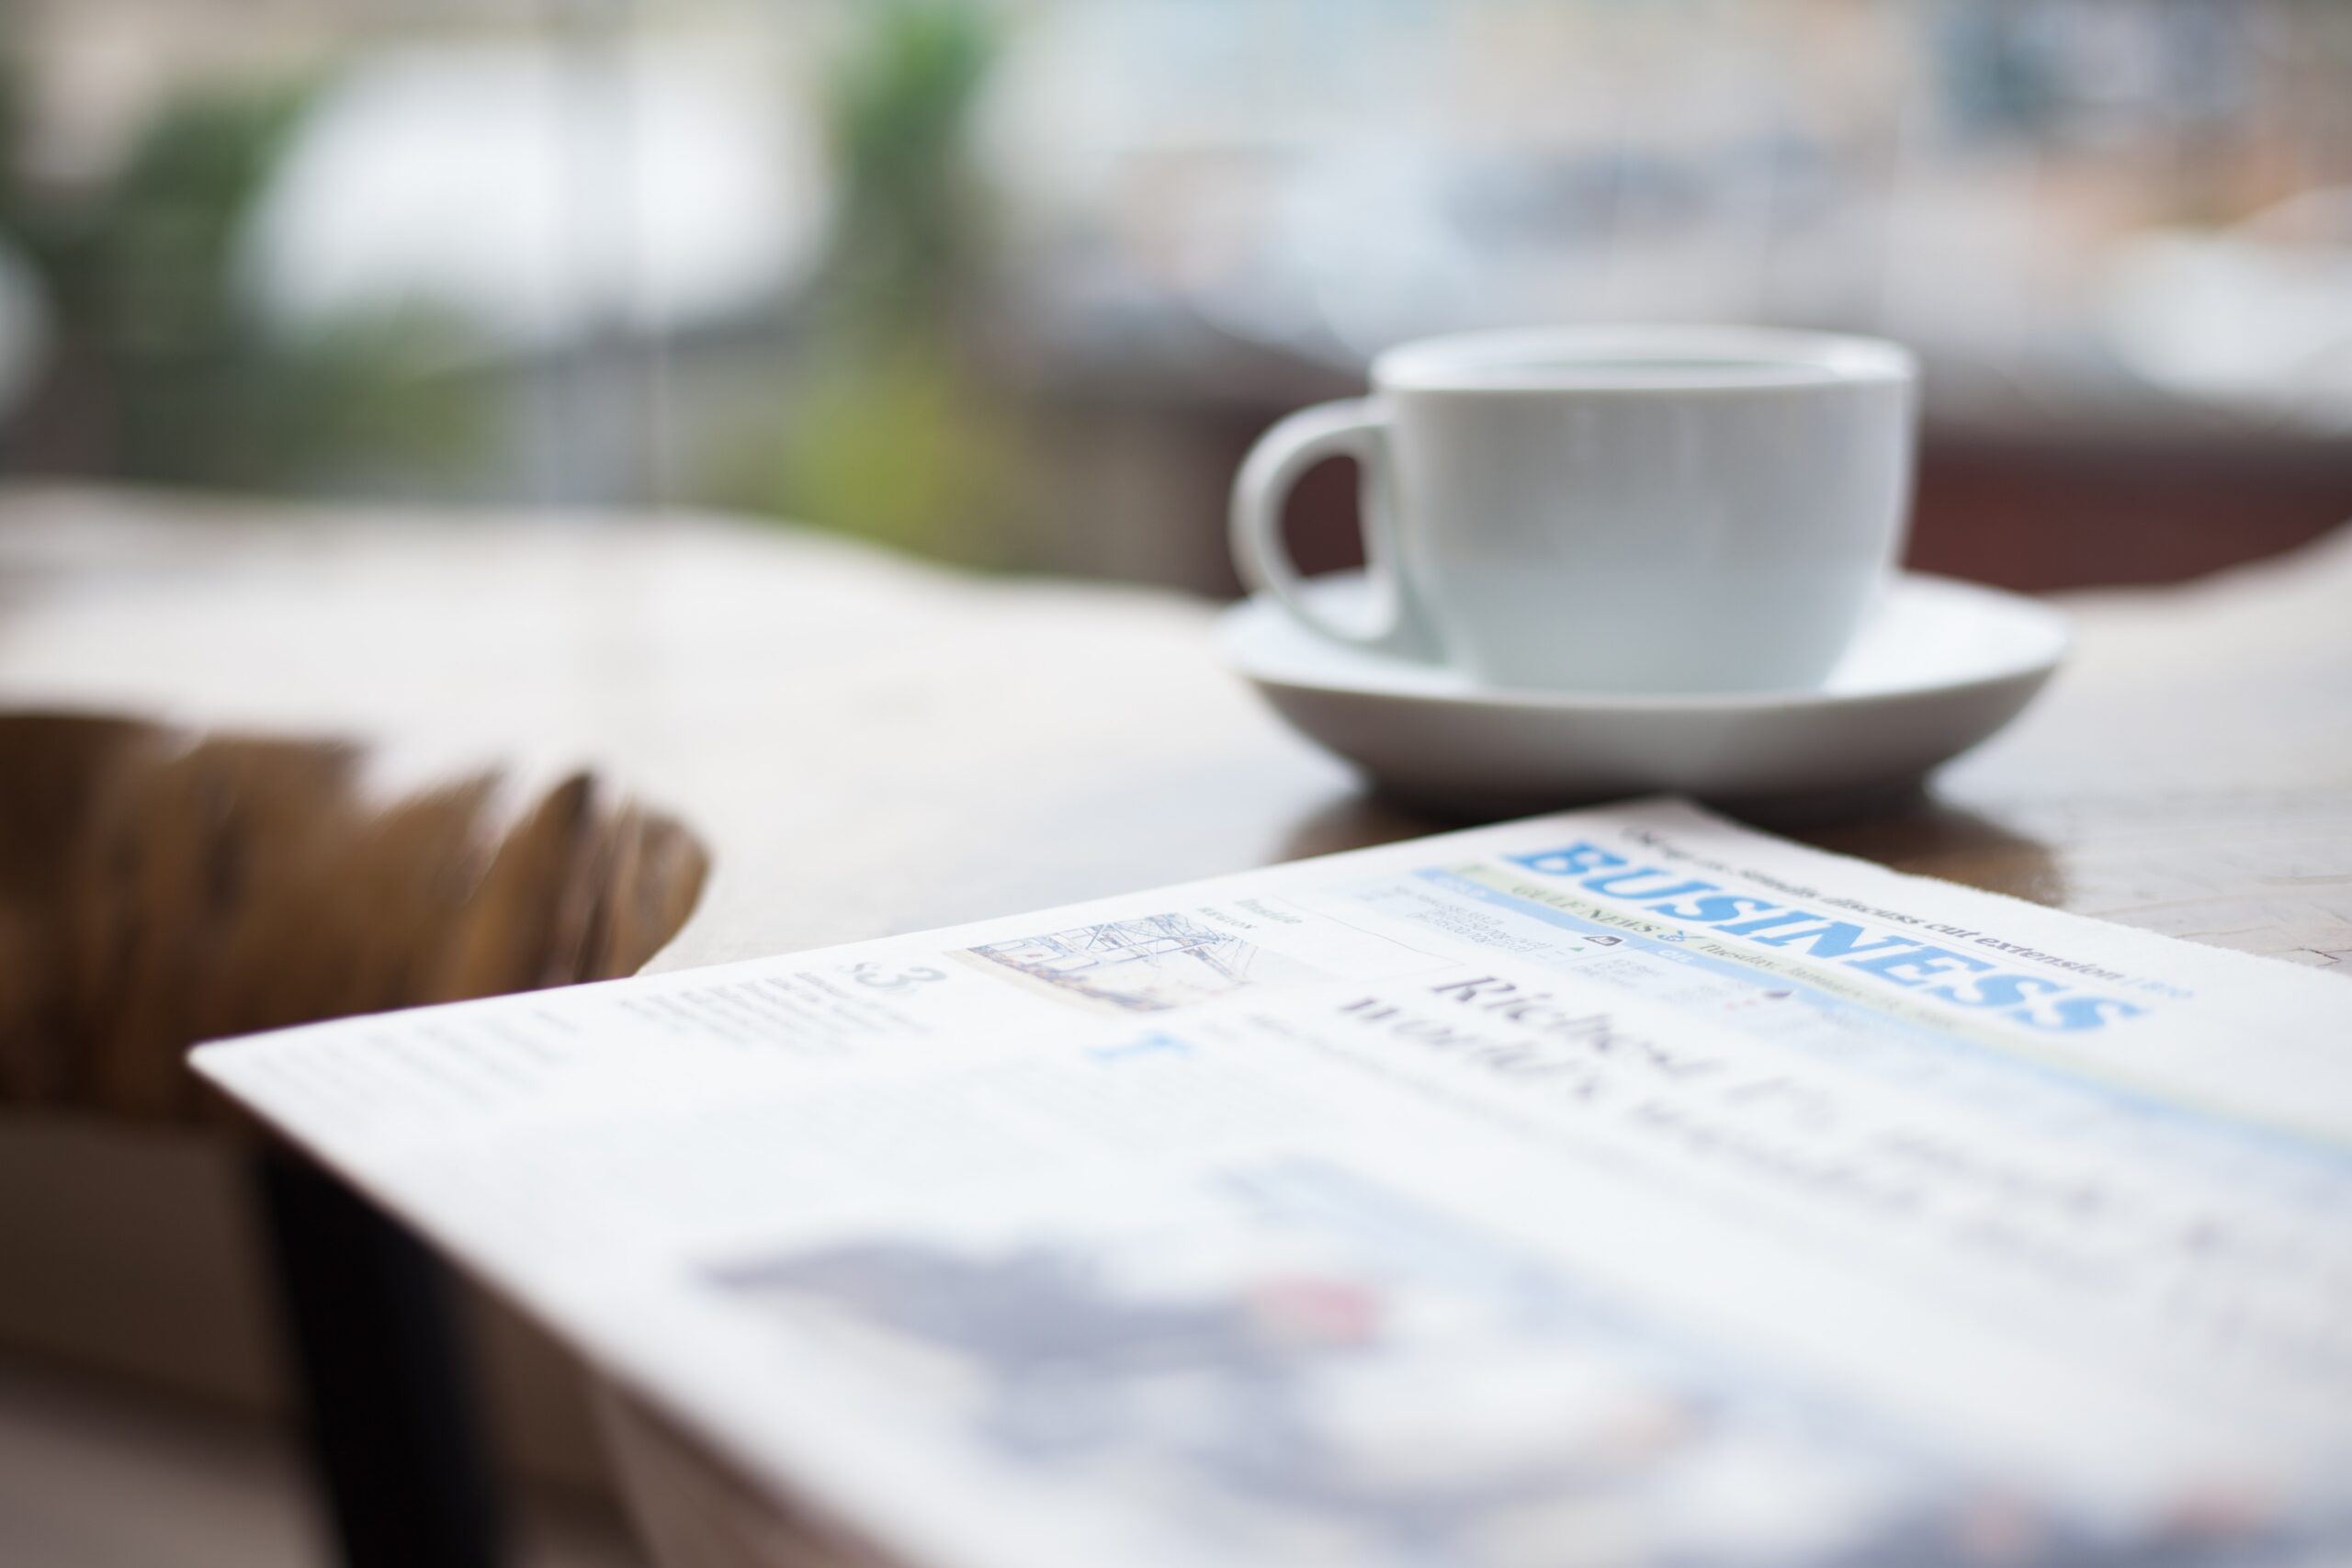 Business section of newspaper sitting on desk next to white cup and saucer.